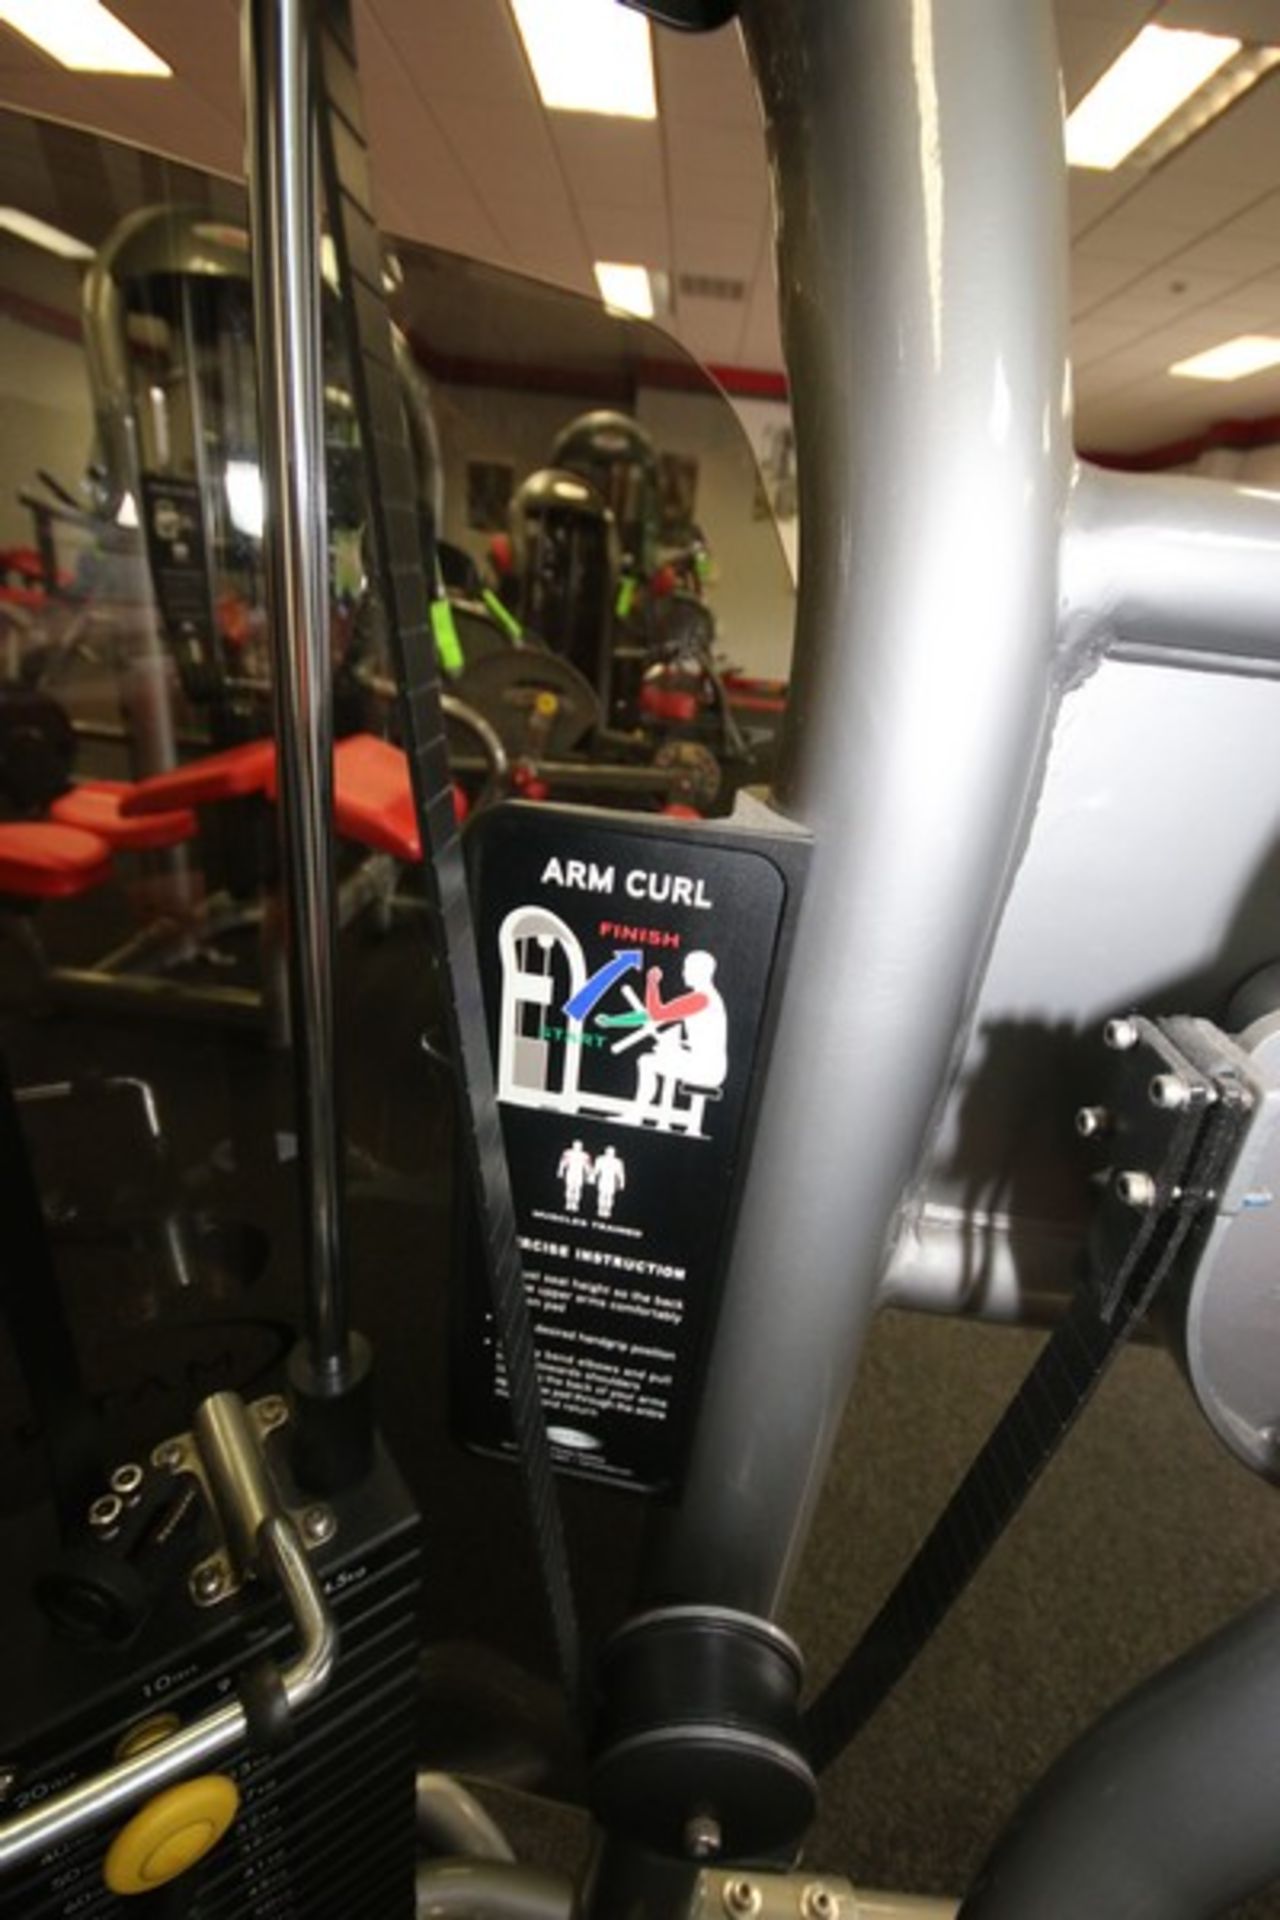 Matrix Arm Curl Cable Machine, 10-200 lbs. Weight Range on Plates, Overall Dims.: Aprox. 48" L x 48" - Image 2 of 5